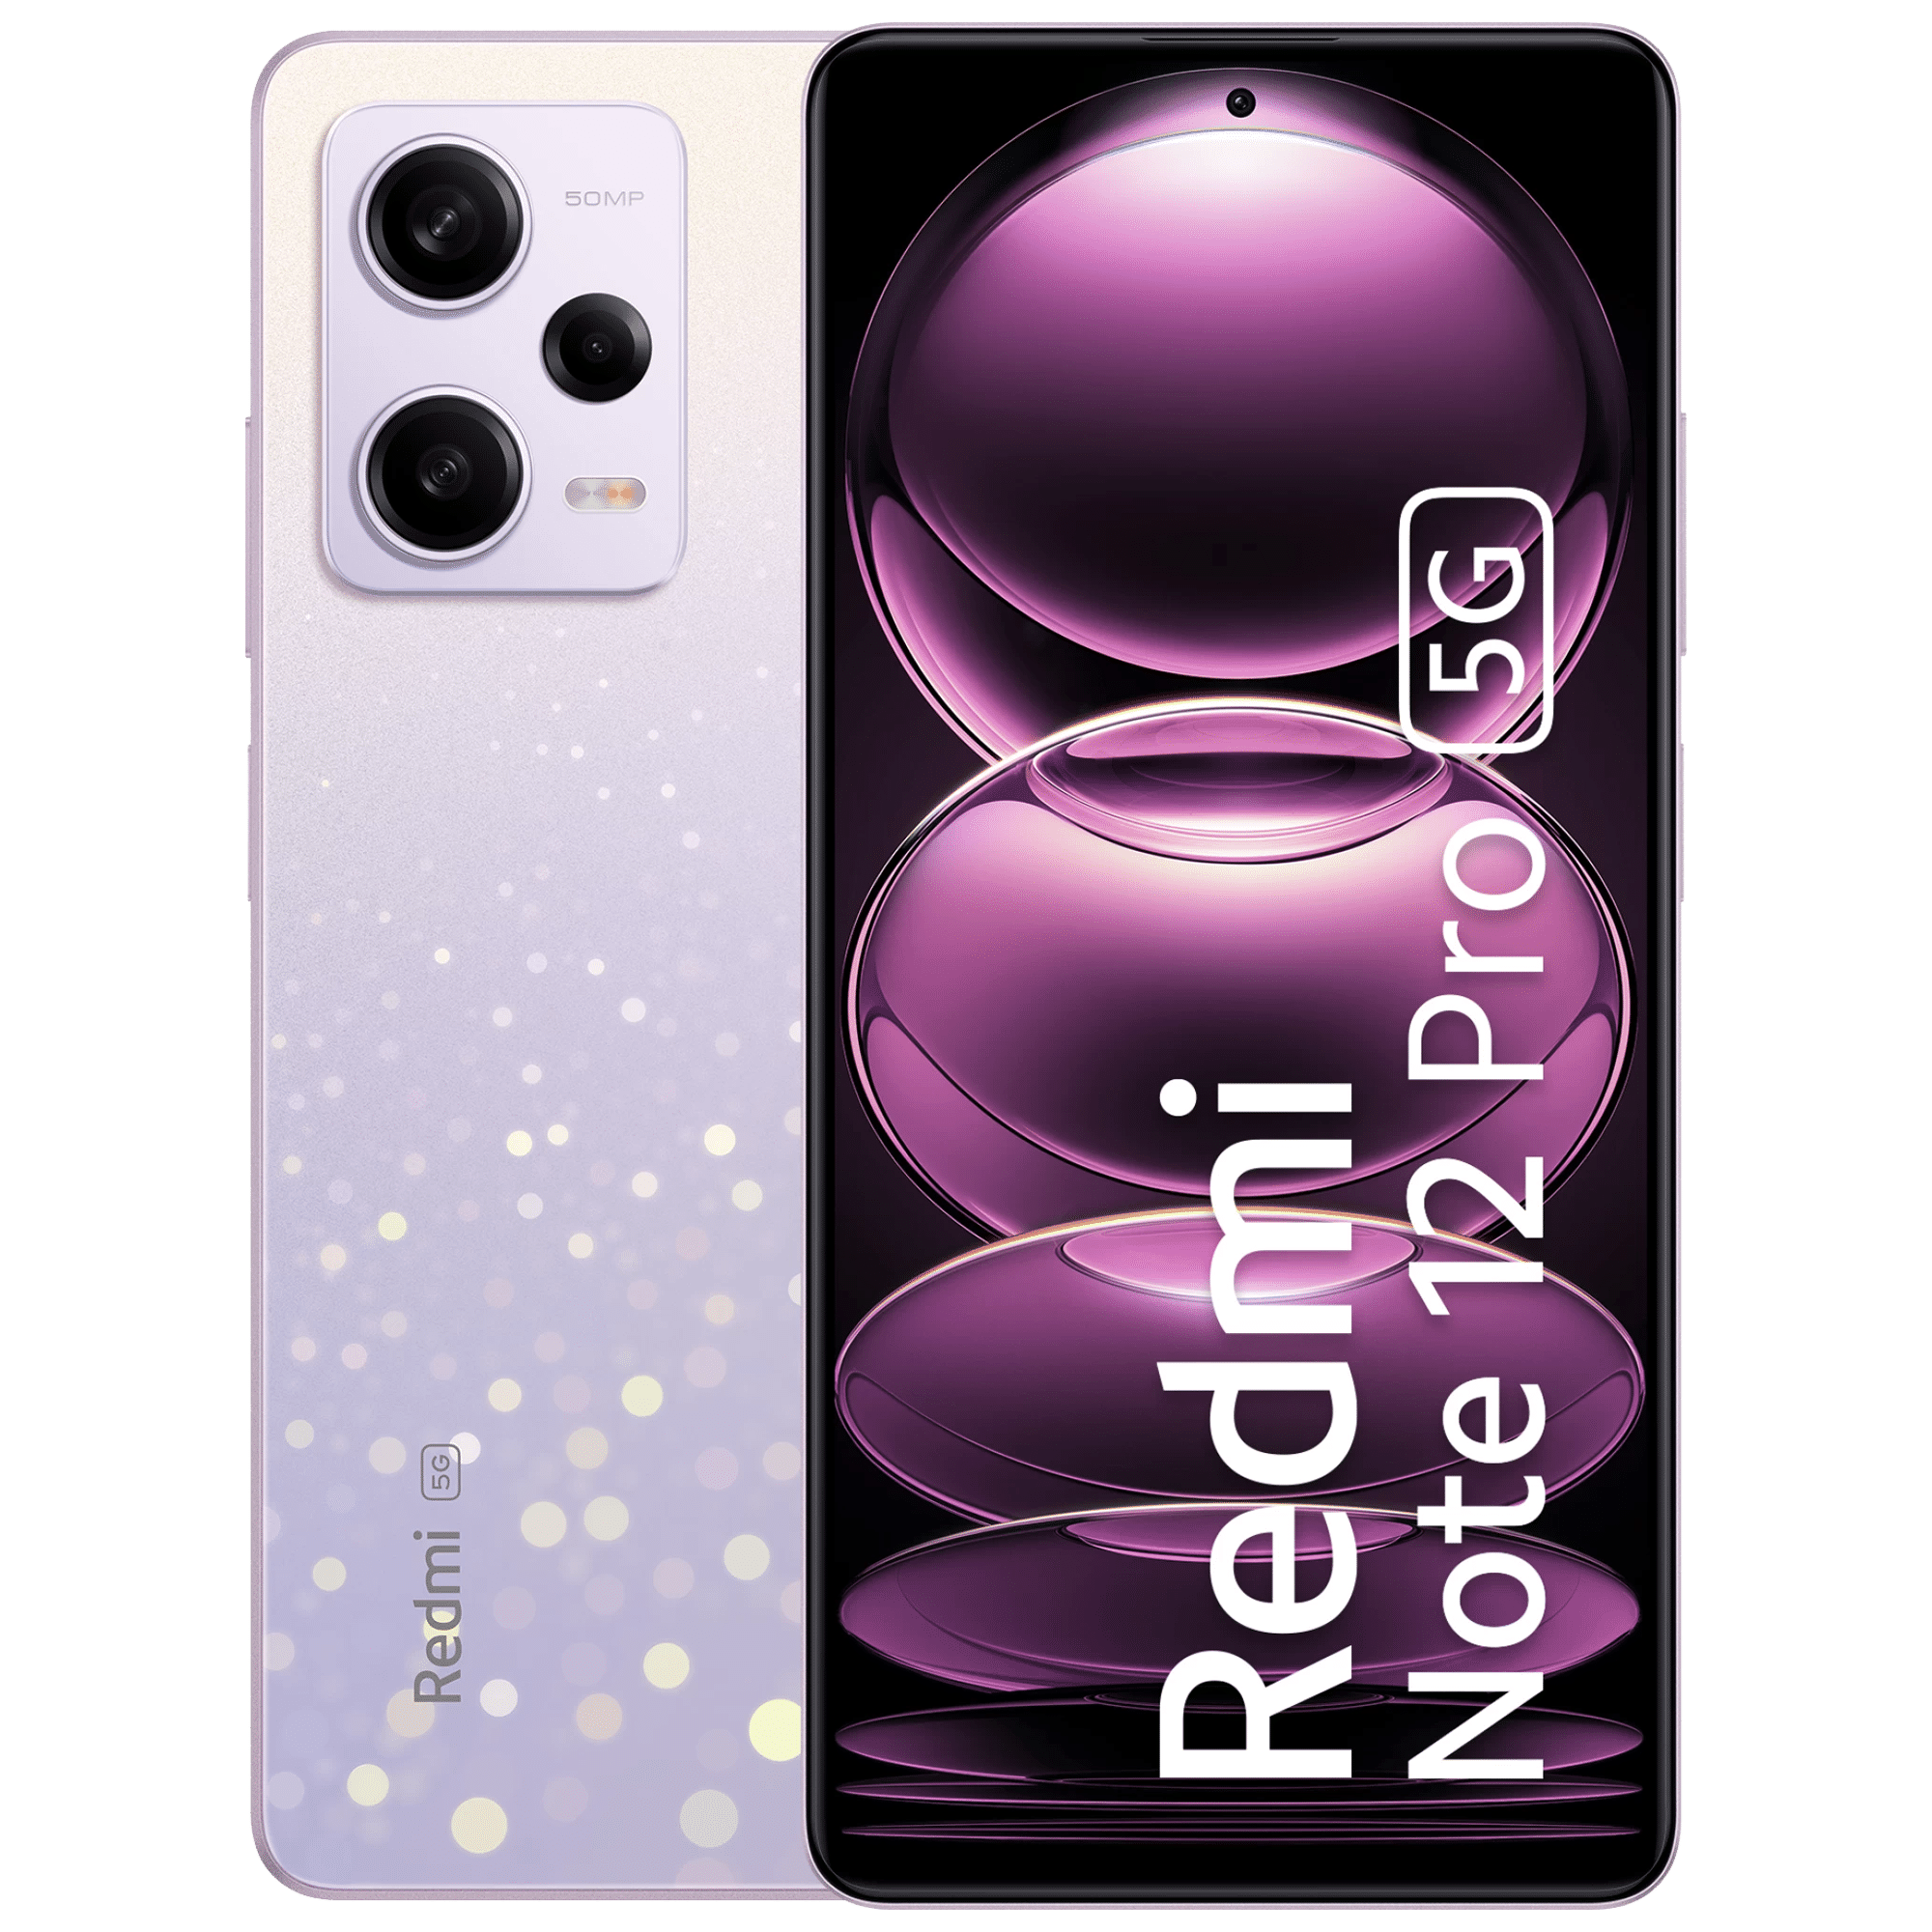 Redmi Note 12 Pro and Note 12 Pro+ with 6.67″ FHD+ 120Hz AMOLED